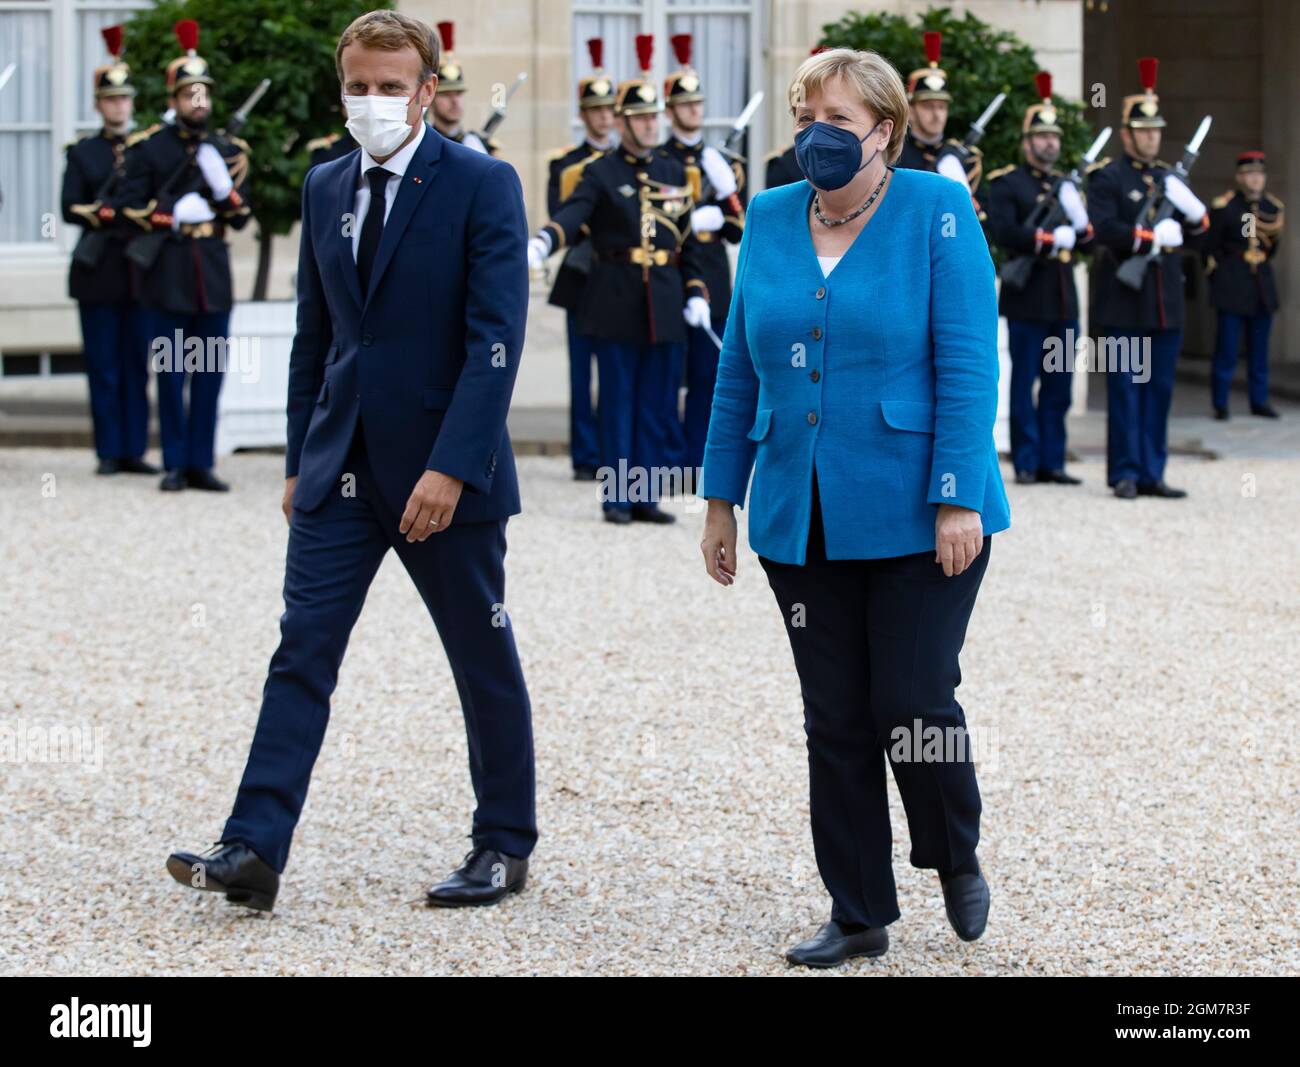 Paris, France. 17th Sep, 2021. French President Emmanuel Macron welcomes German Chancellor Angela Merkel upon her arrival at the Elysee Palace in Paris, France, Sept. 16, 2021. Credit: Xinhua/Alamy Live News Stock Photo